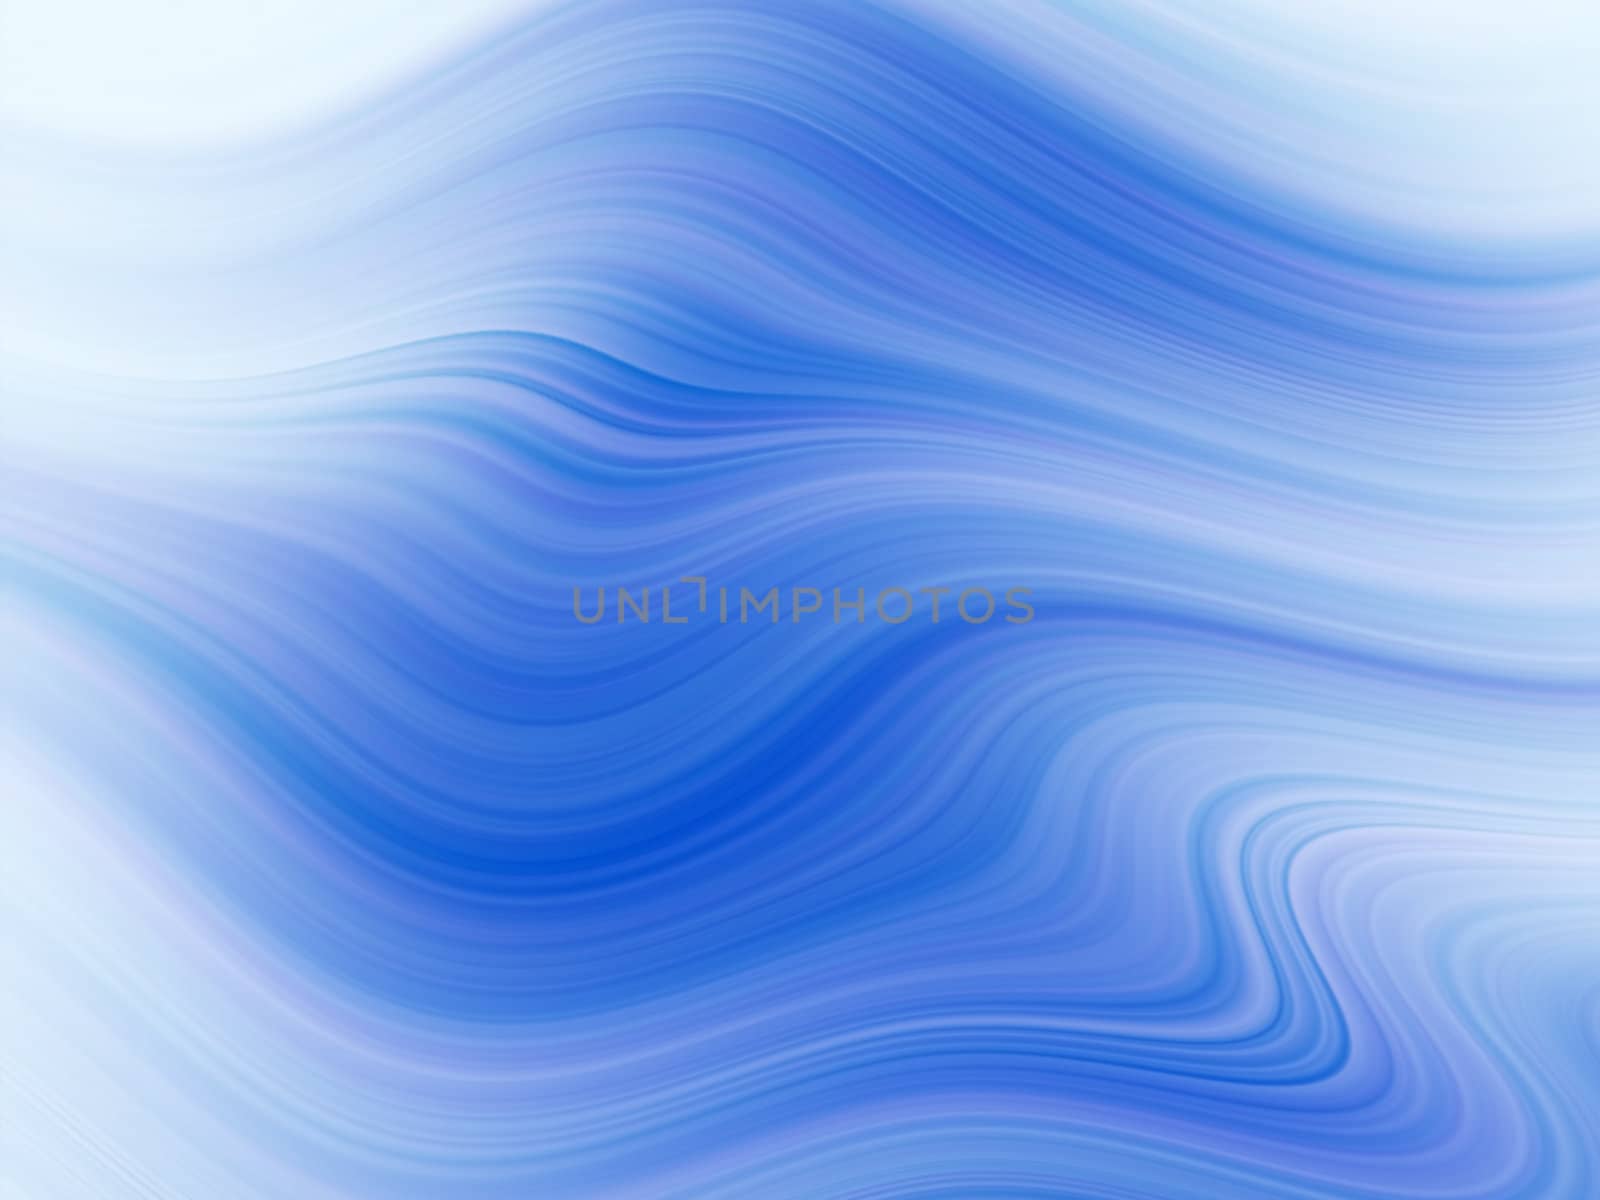 Blue blurry waves and curved lines background